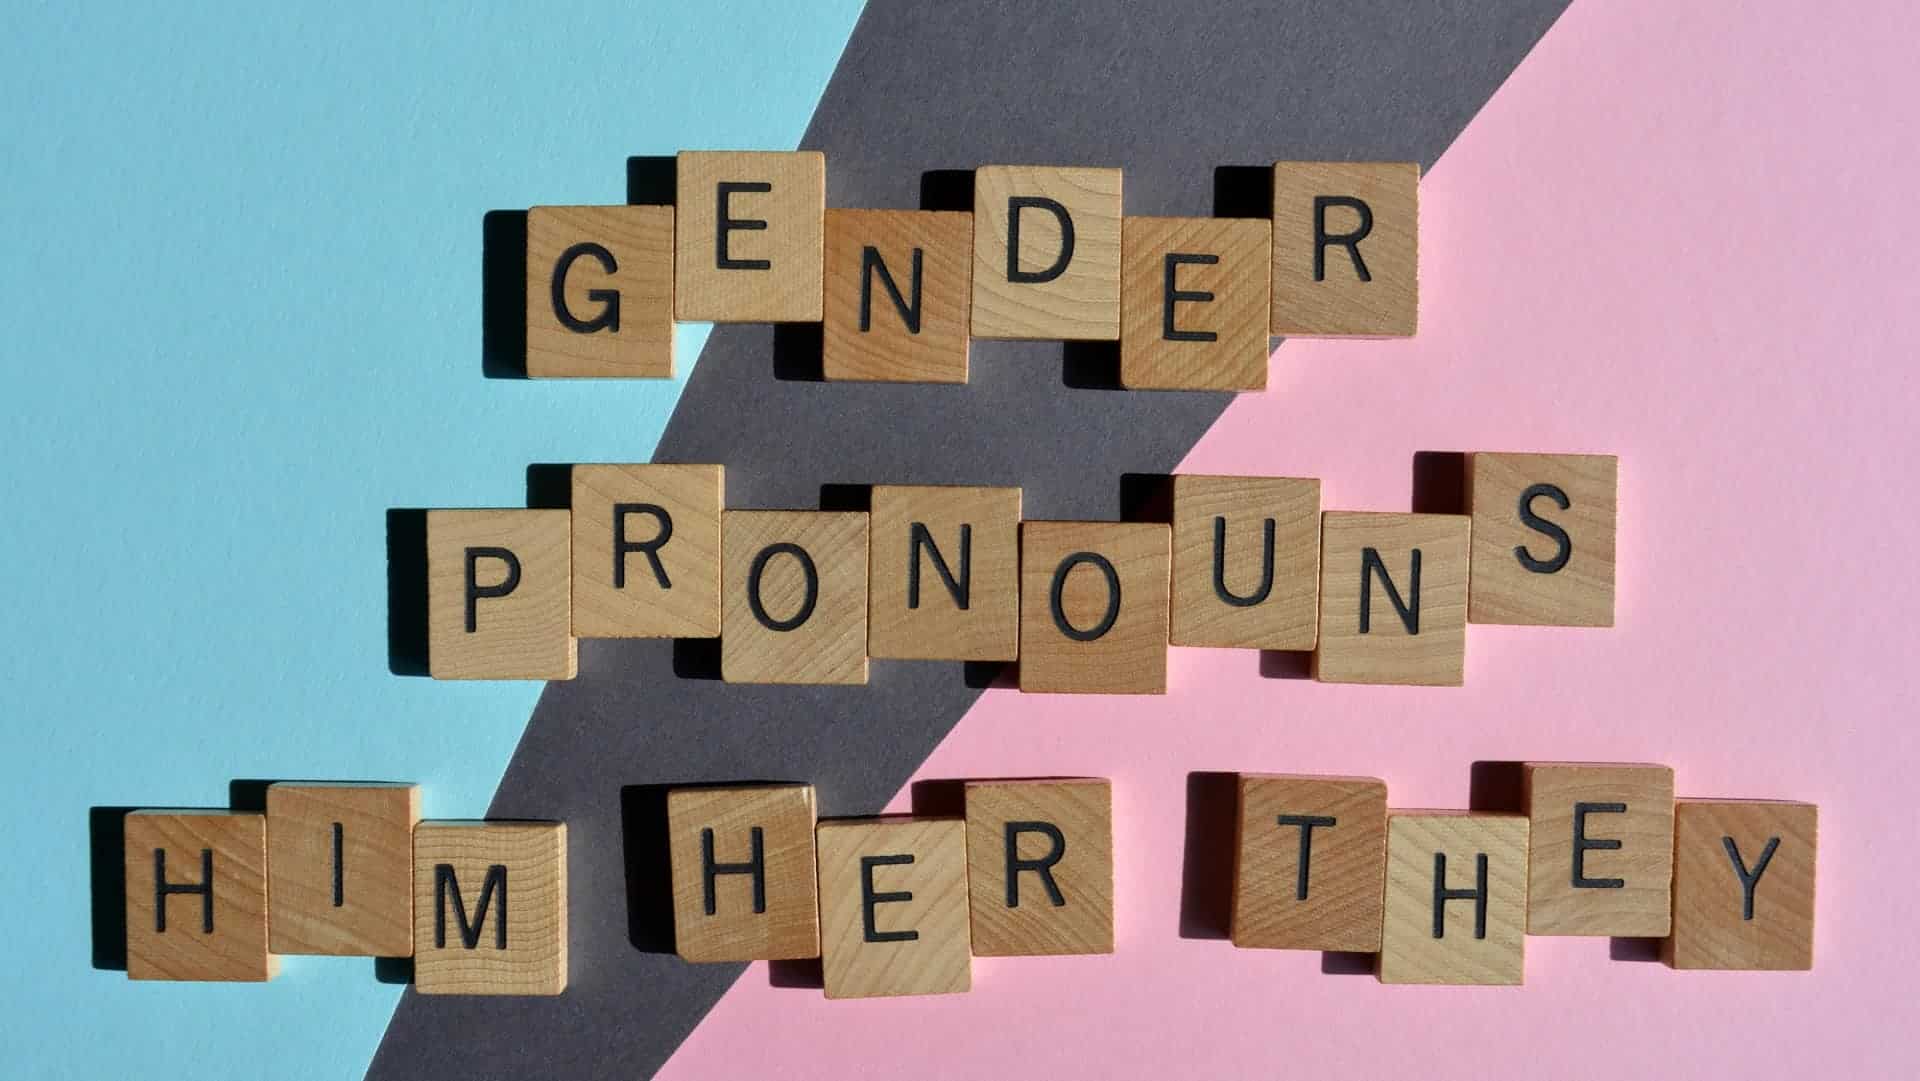 all pronouns for genders